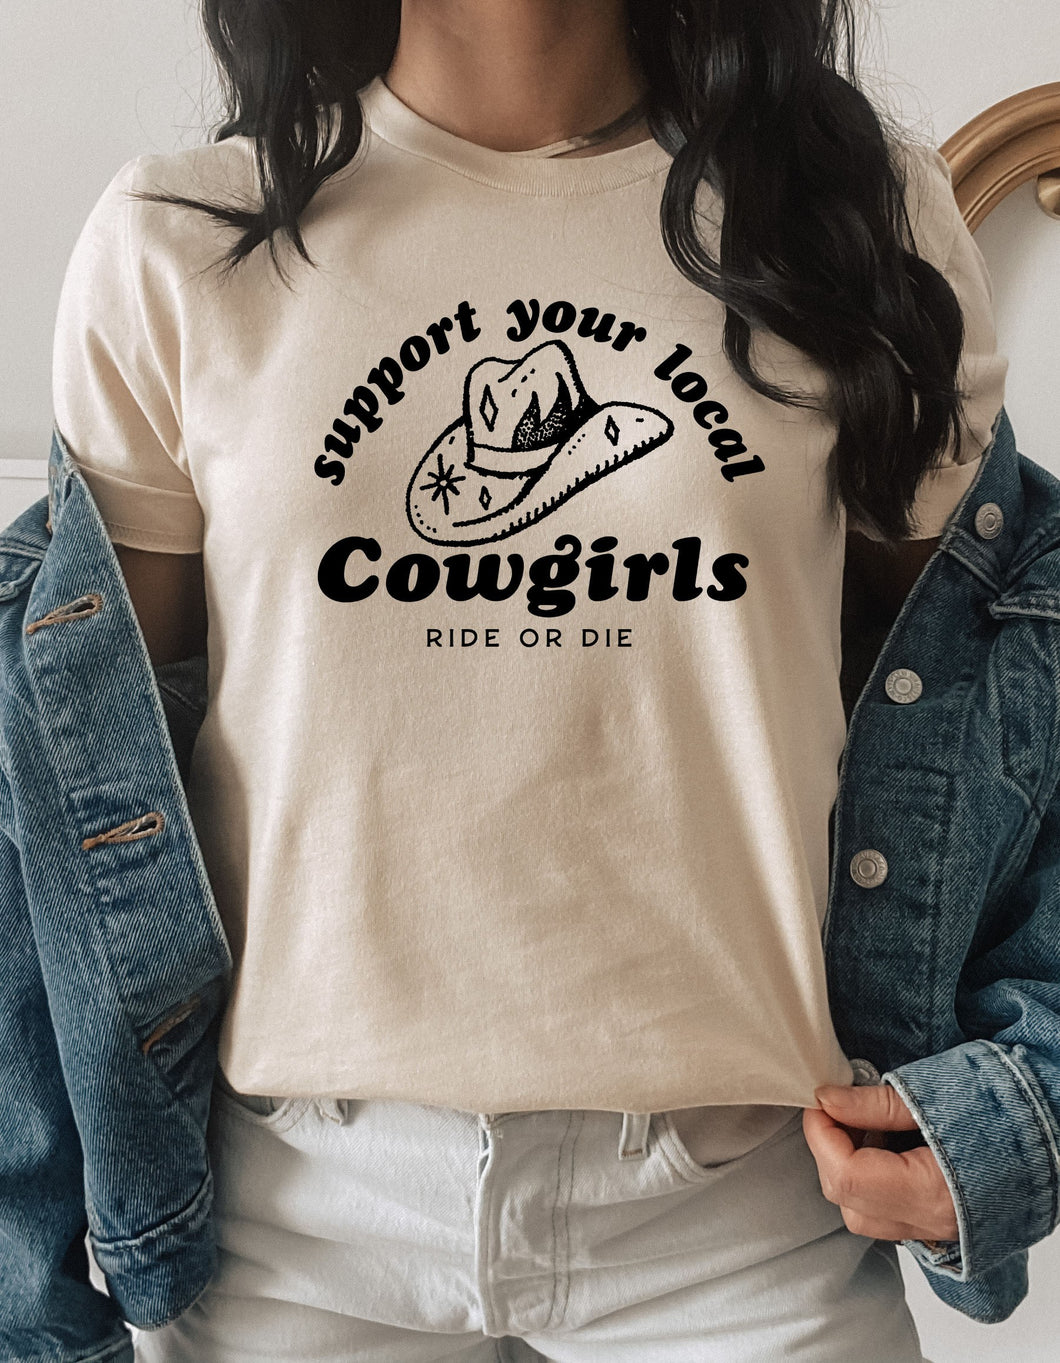 Support Your Local Cowgirls Tee